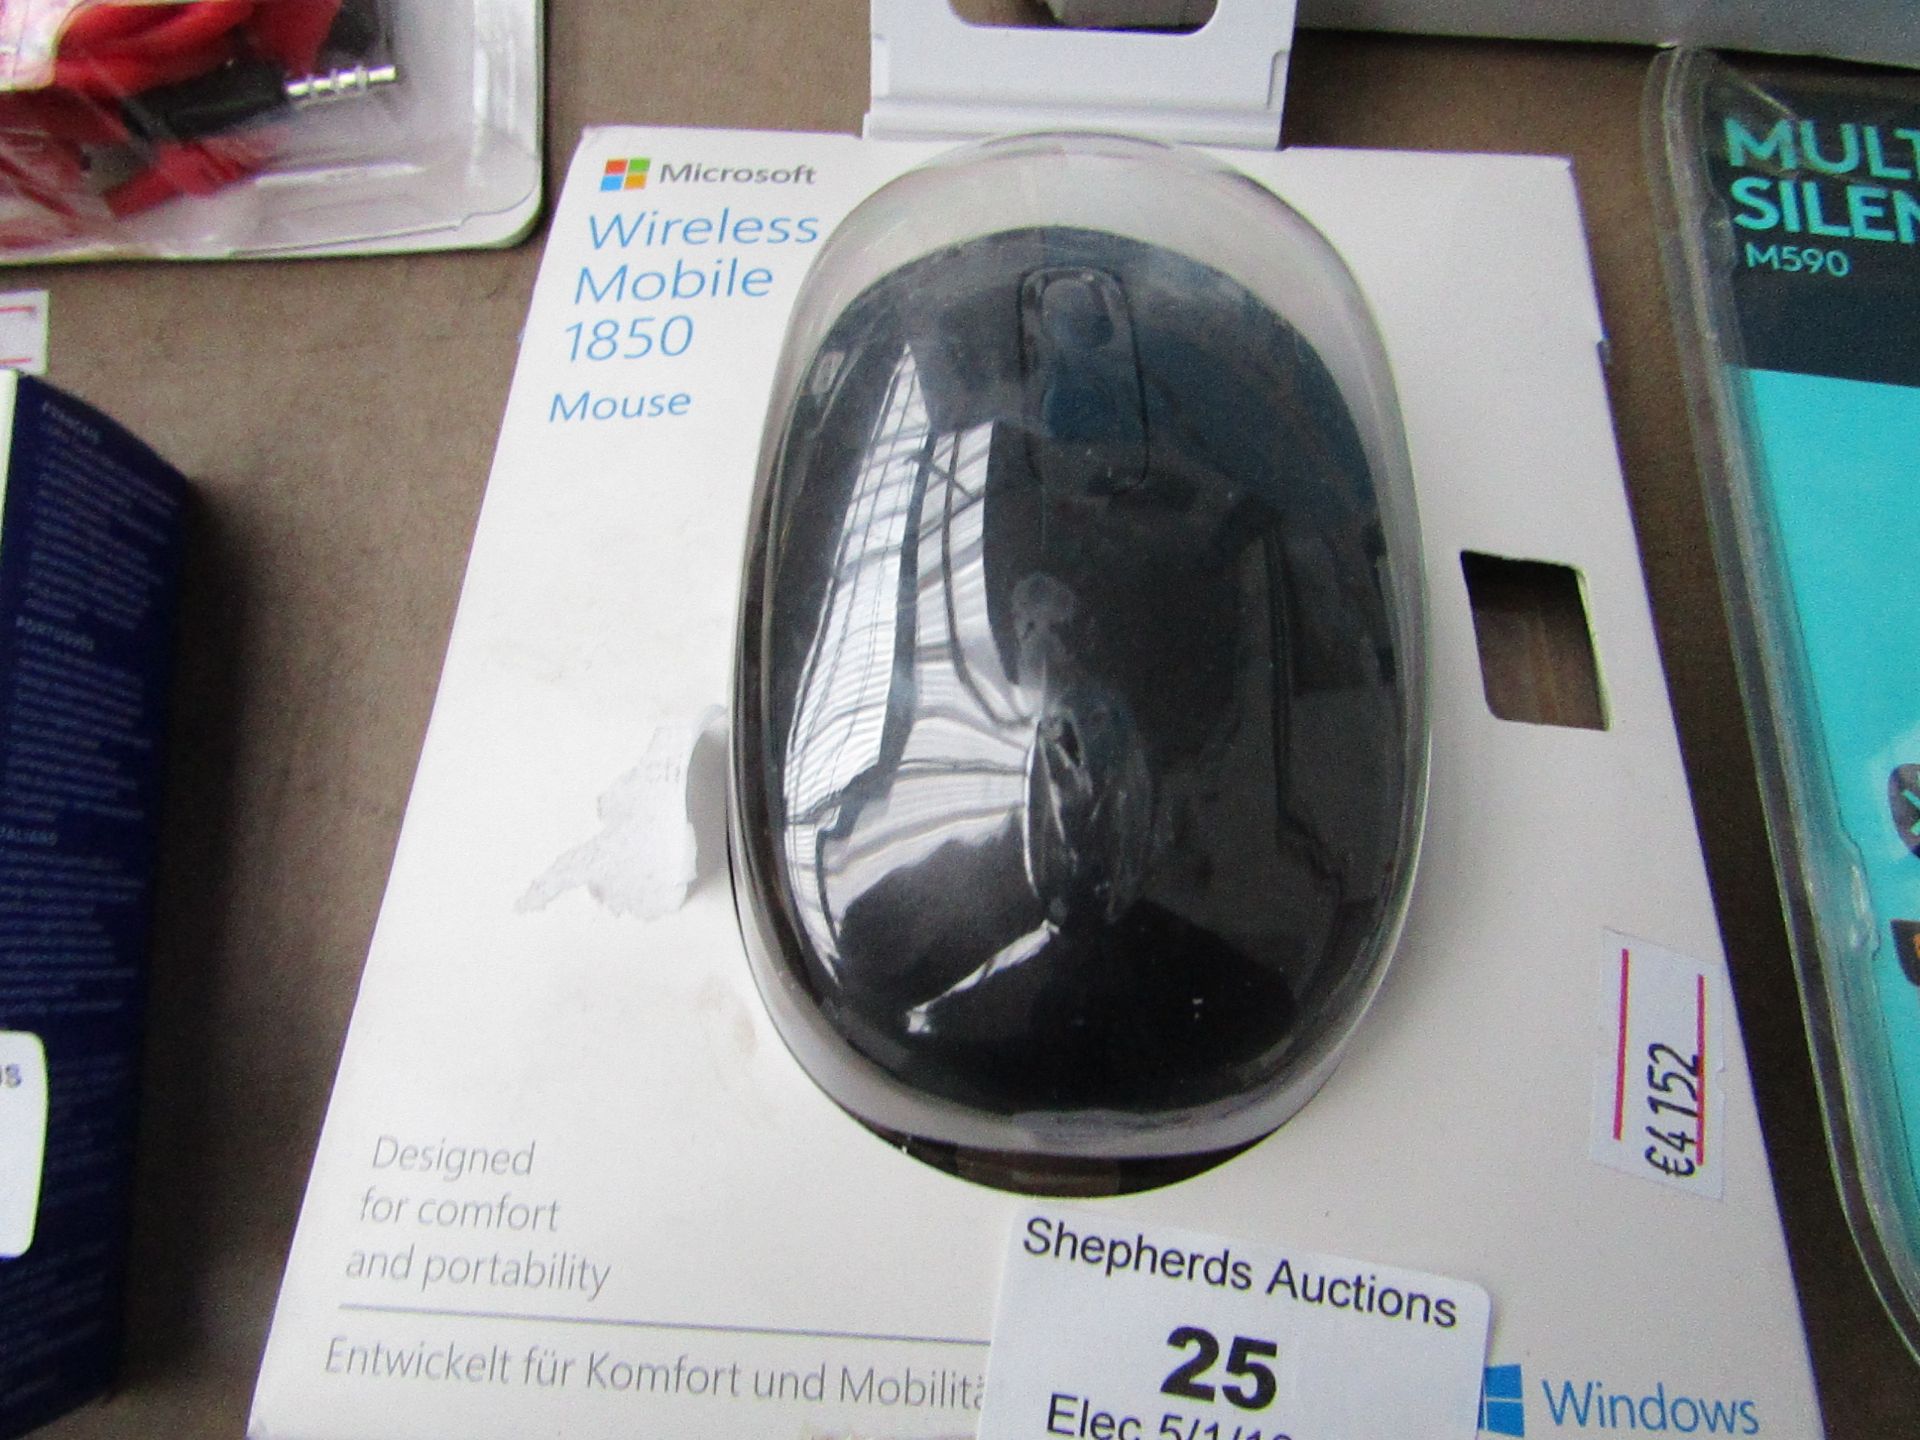 Microsoft - Wireless Mobile 1850 Mouse, in original packaging.